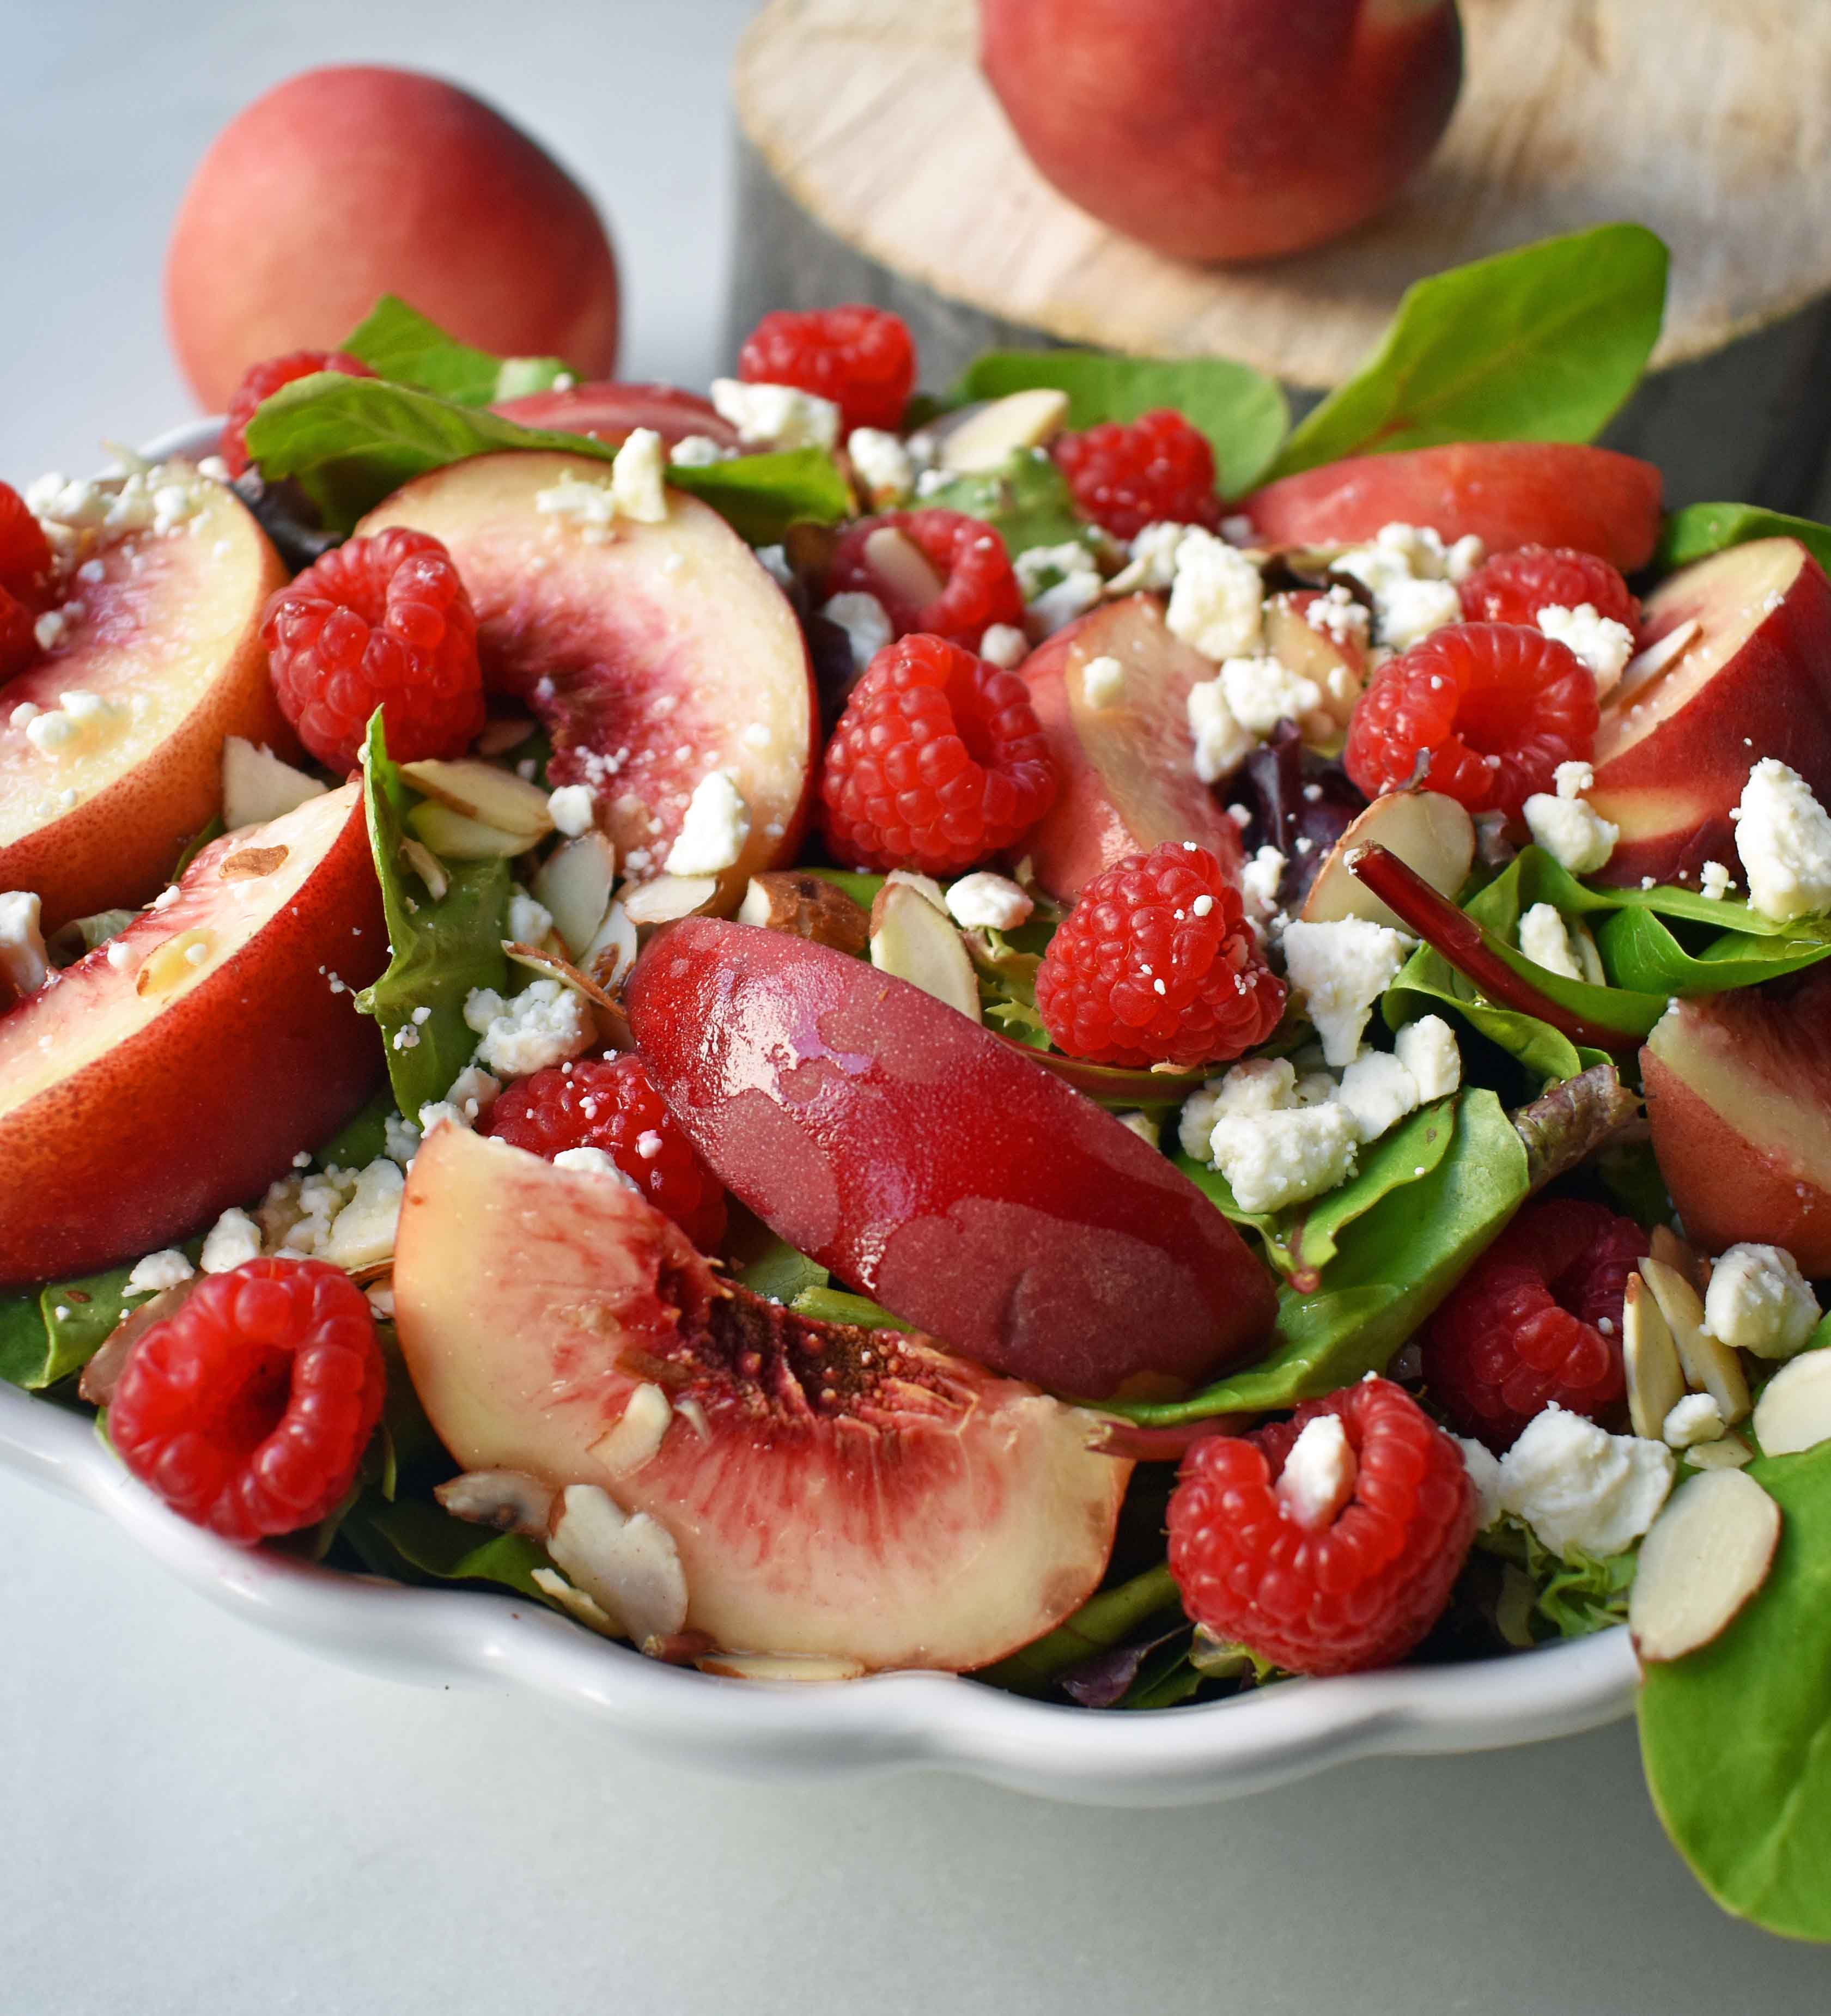 White Peach Raspberry Almond Salad. Fresh white peaches or nectarines, plump raspberries, candied almonds, creamy feta or white cheddar cheese all tossed with a sweet dressing. The perfect summer raspberry peach salad. www.modernhoney.com